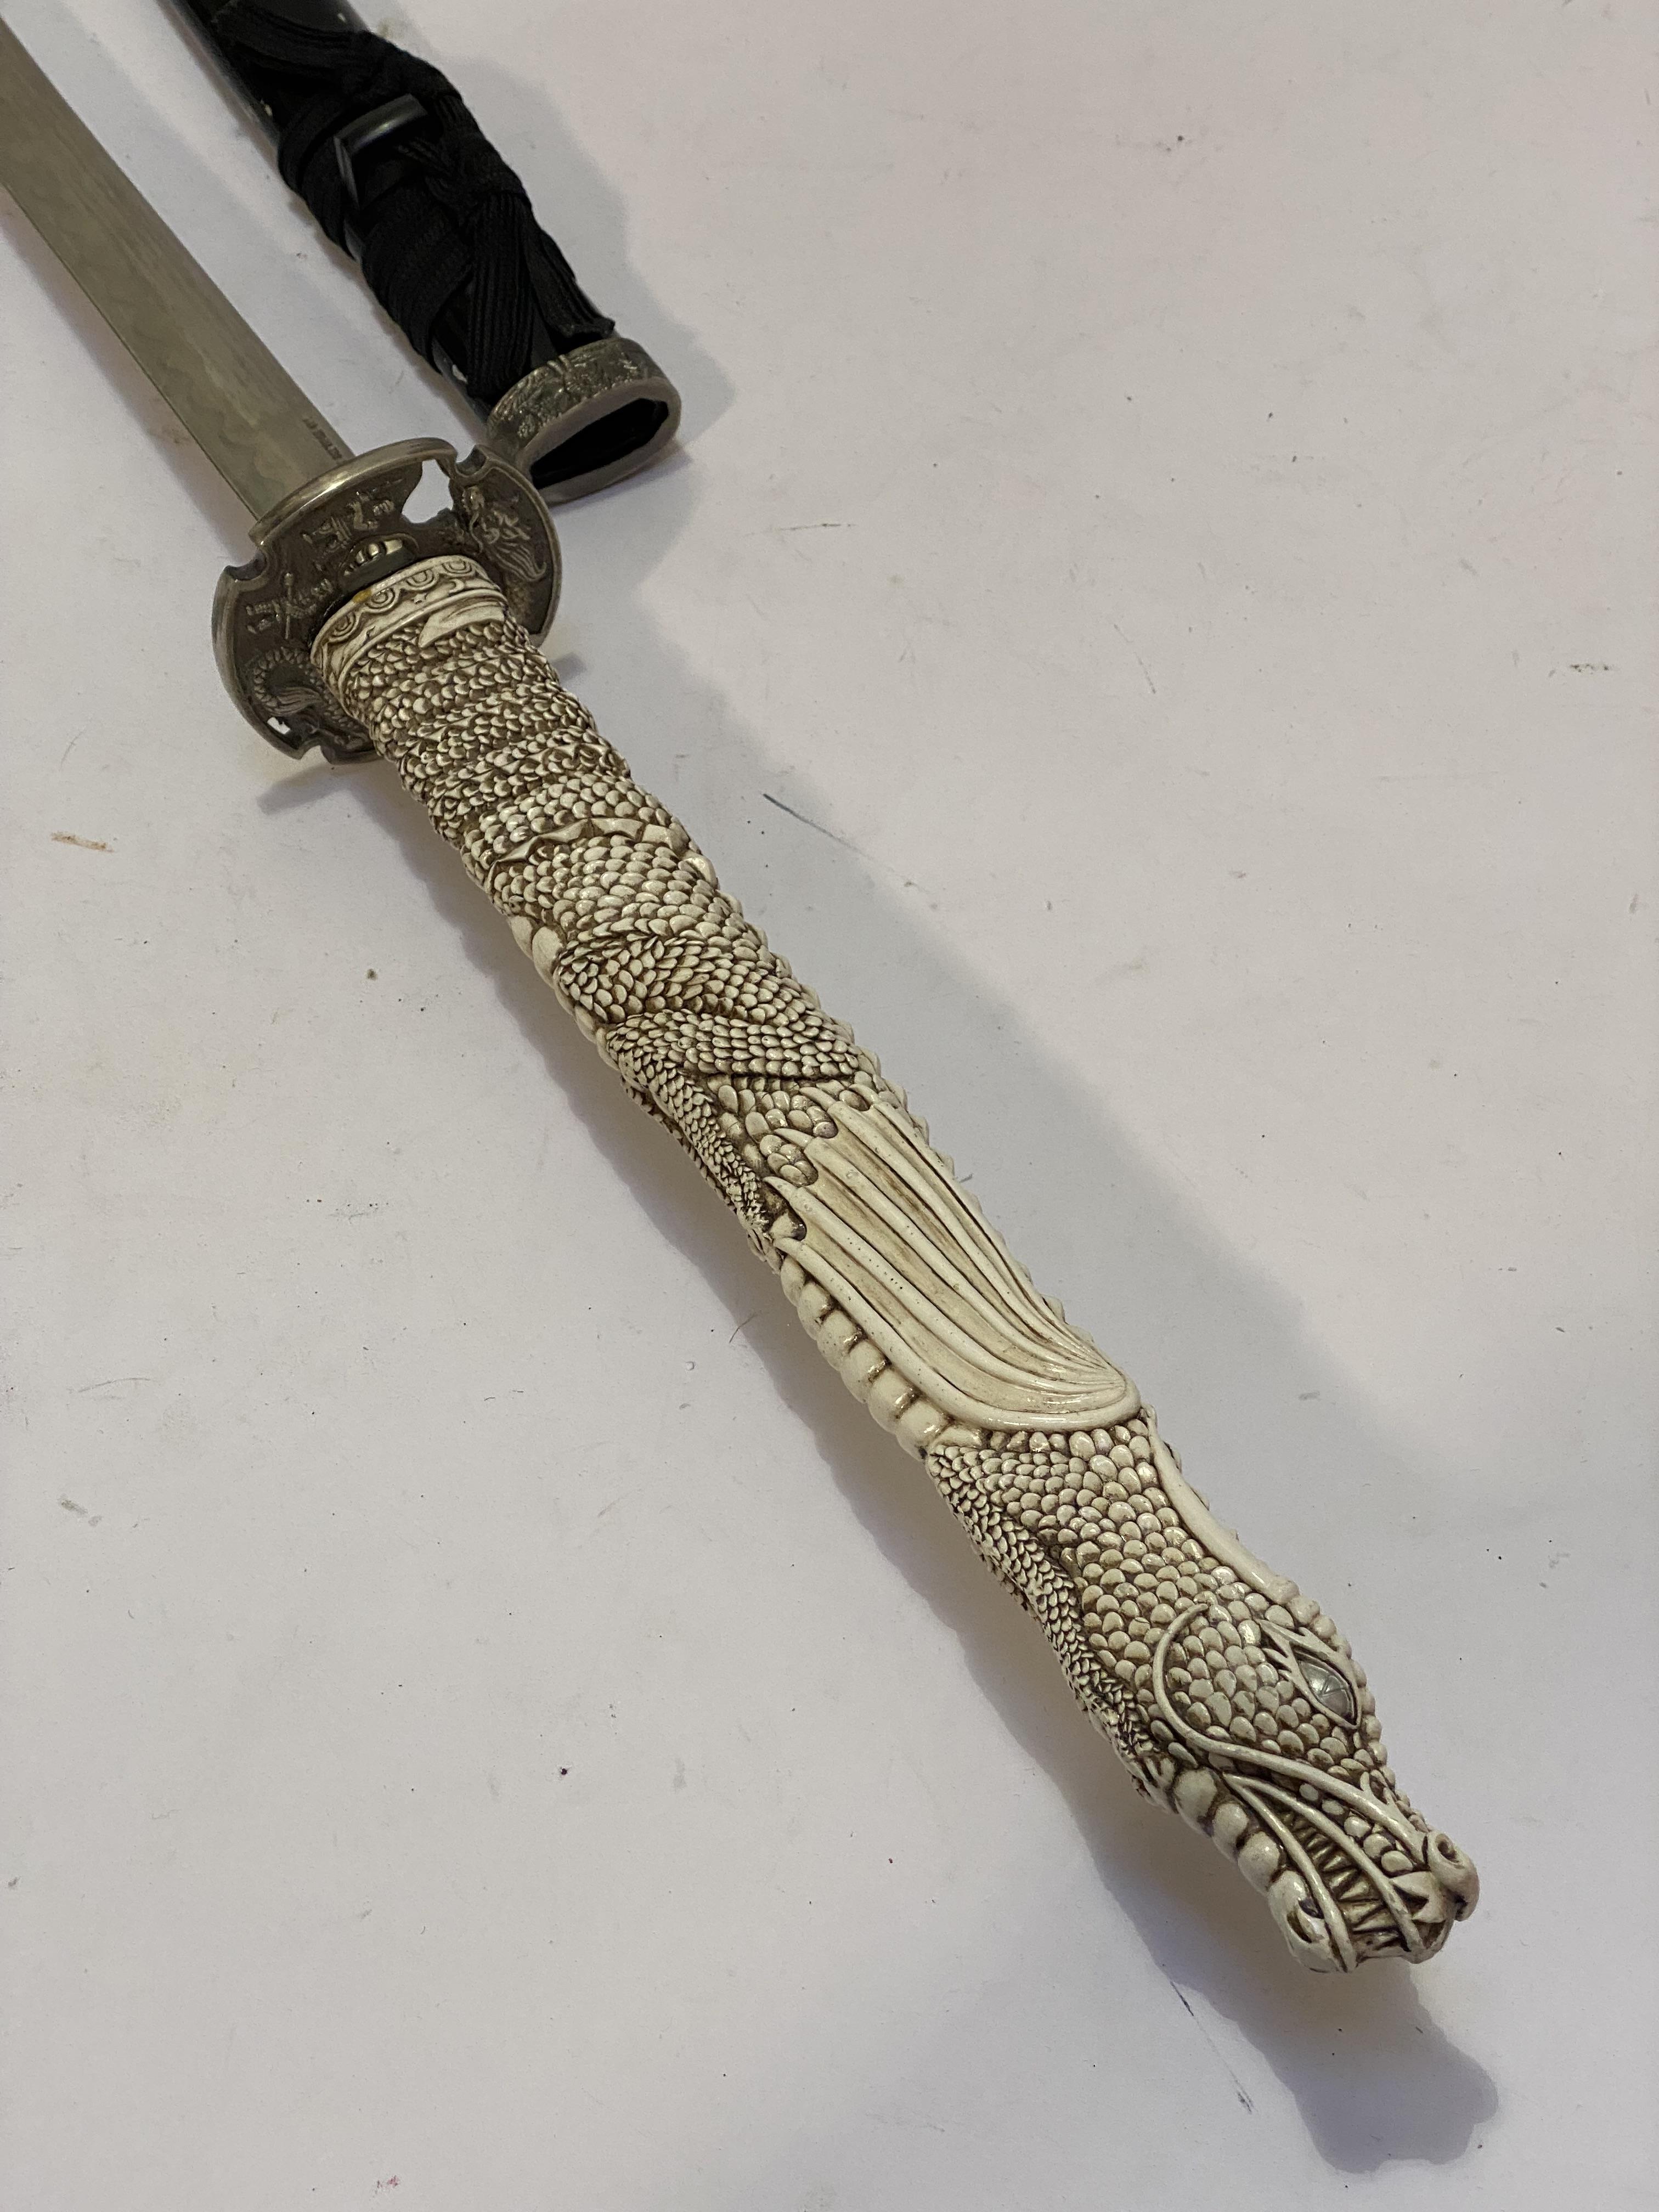 Japanese Samuri sword, faux ivory handle in the form of a dragon, cast metal tang, plain black and - Image 2 of 2